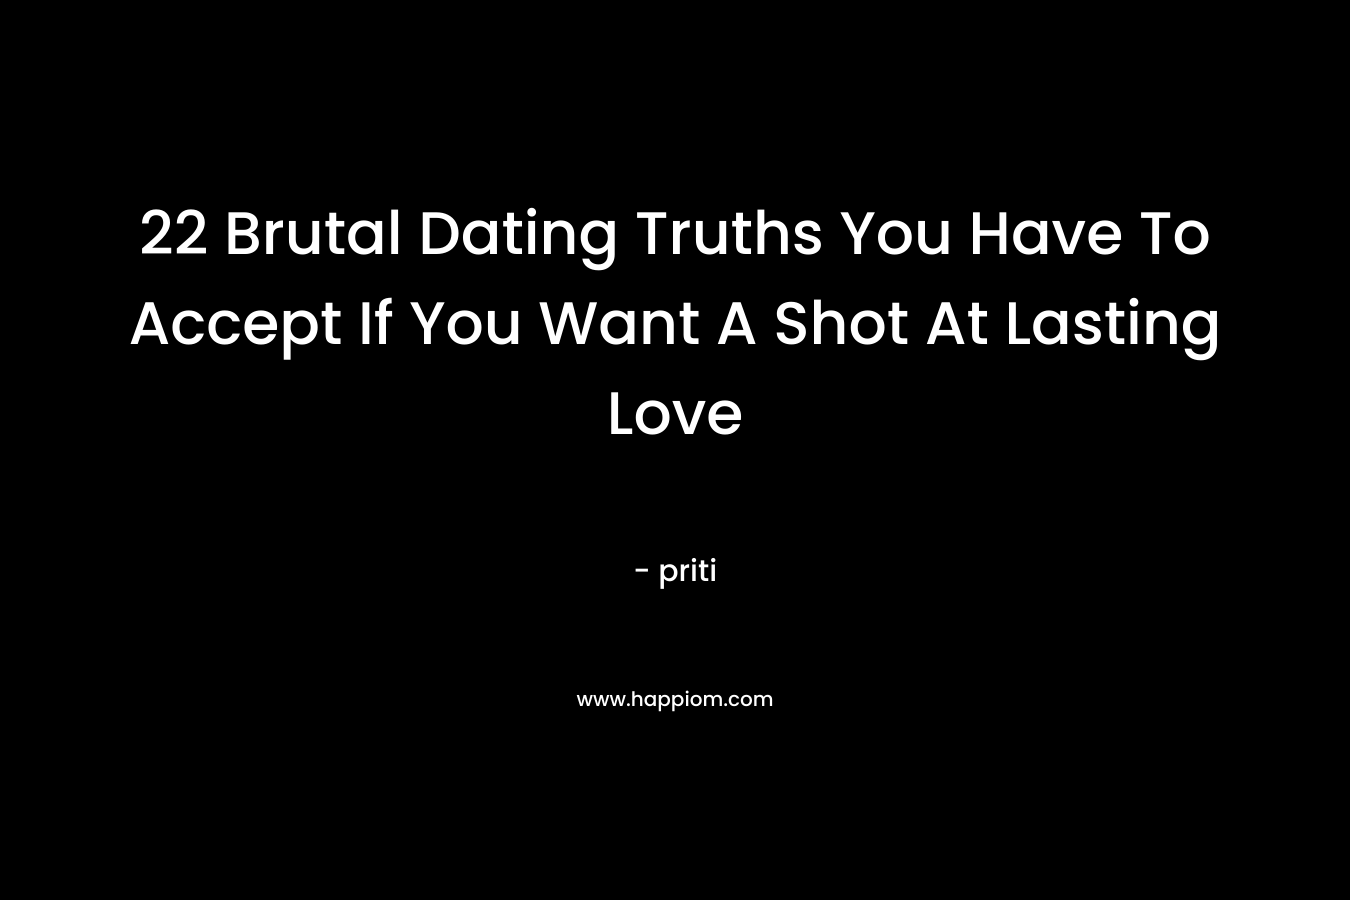 22 Brutal Dating Truths You Have To Accept If You Want A Shot At Lasting Love